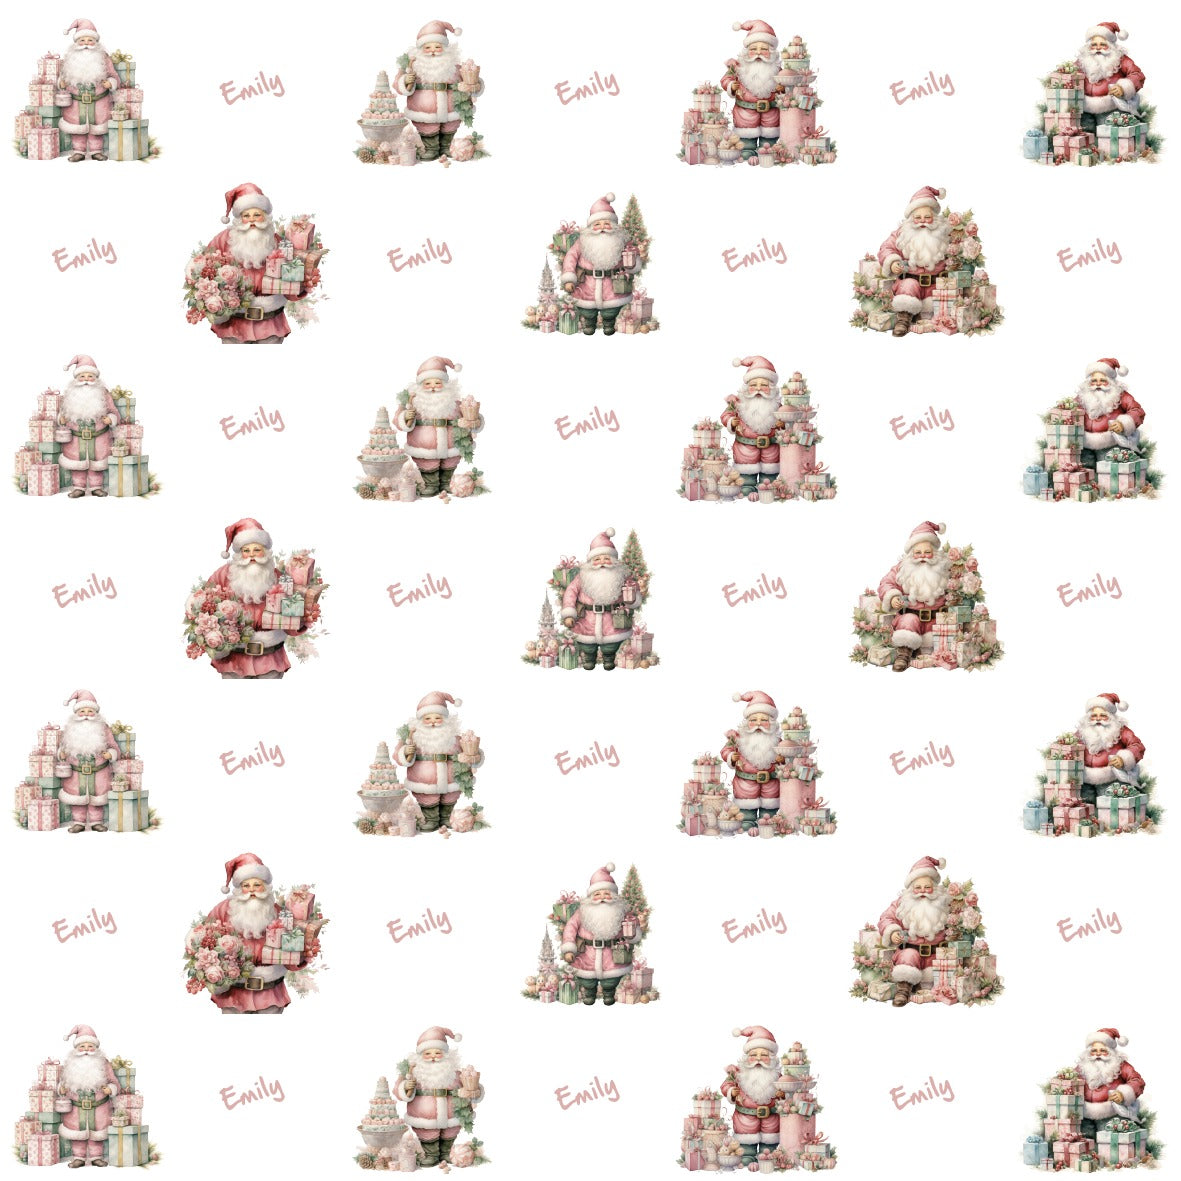 Santa with gifts wrapping paper with customizable name beside, Repeating pattern of 7 different Santa's in same style.